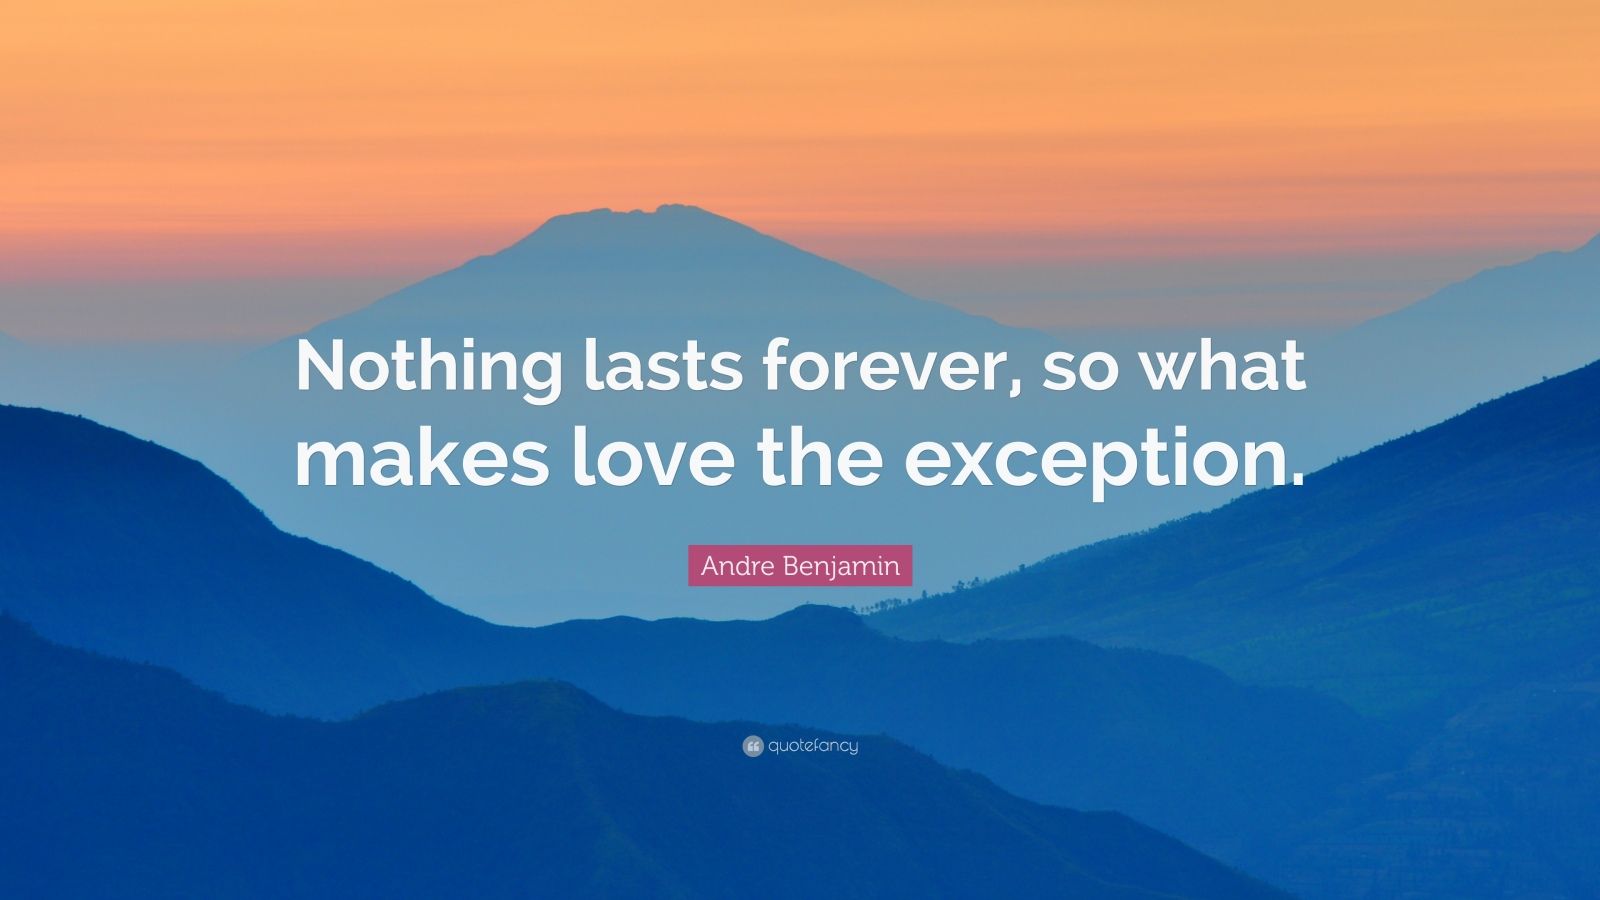 Andre Benjamin Quote “nothing Lasts Forever So What Makes Love The Exception” 7 Wallpapers